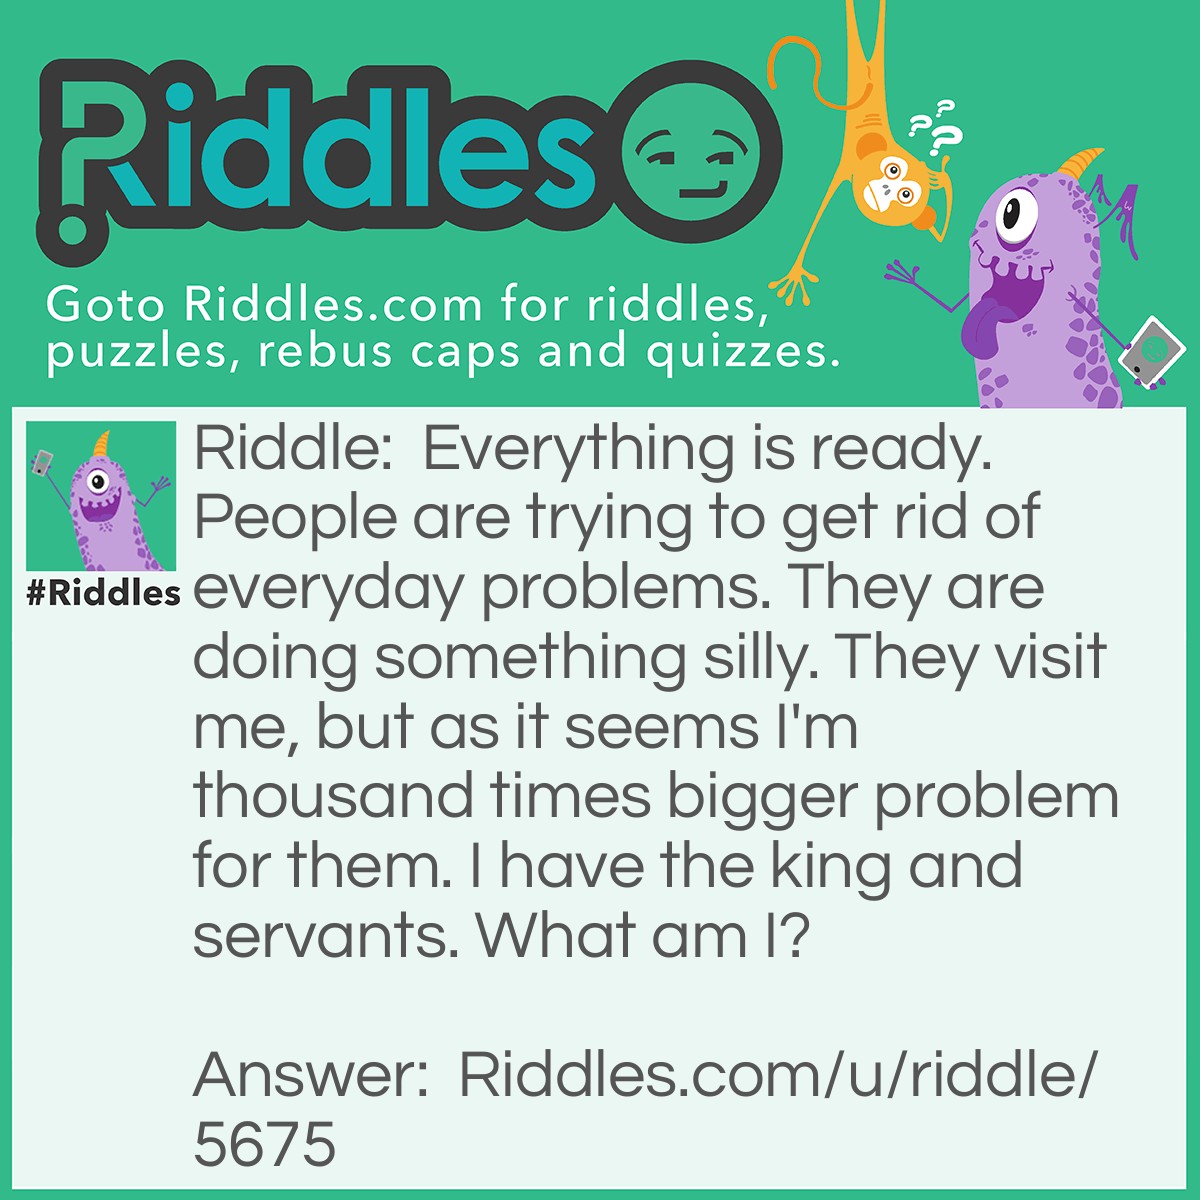 Riddle: Everything is ready. People are trying to get rid of everyday problems. They are doing something silly. They visit me, but as it seems I'm thousand times bigger problem for them. I have the king and servants. What am I? Answer: The underworld.